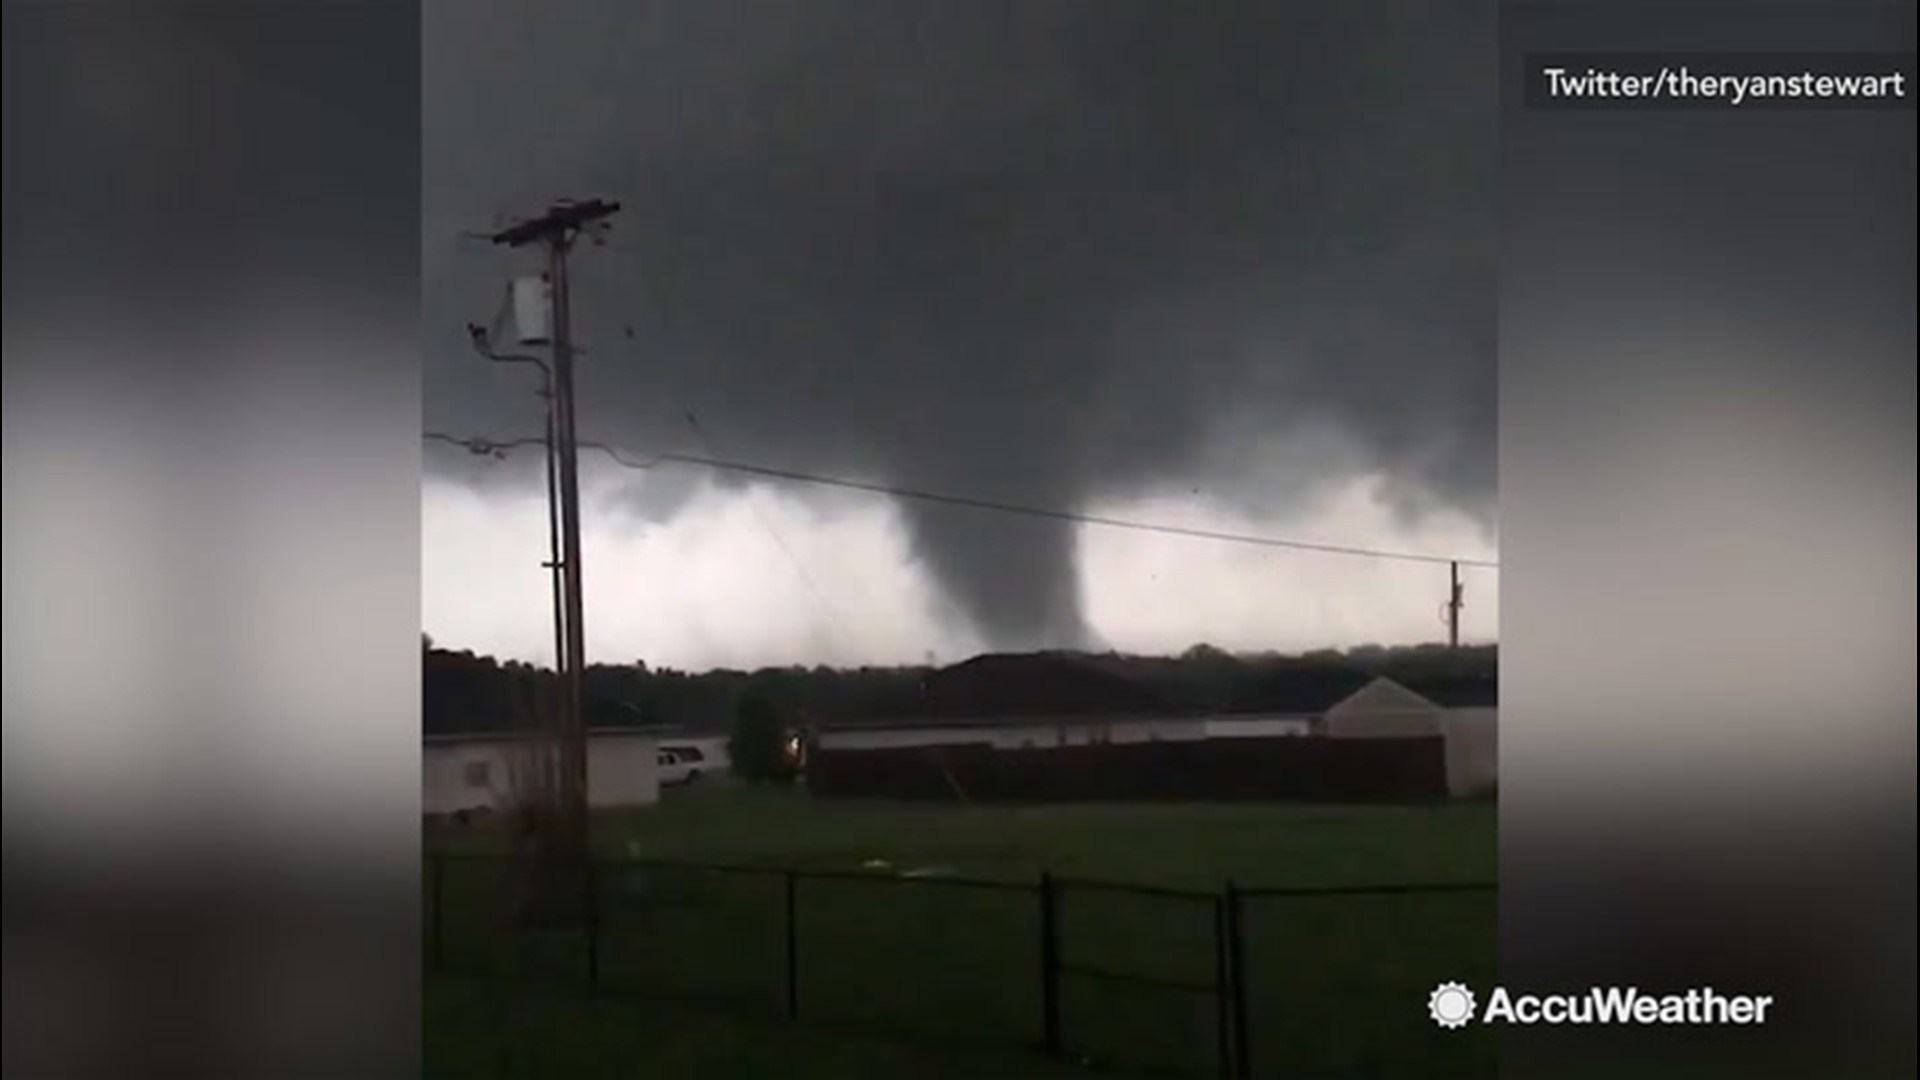 A tornado was filmed about three blocks away in Carl Junction, Missouri on May 22.